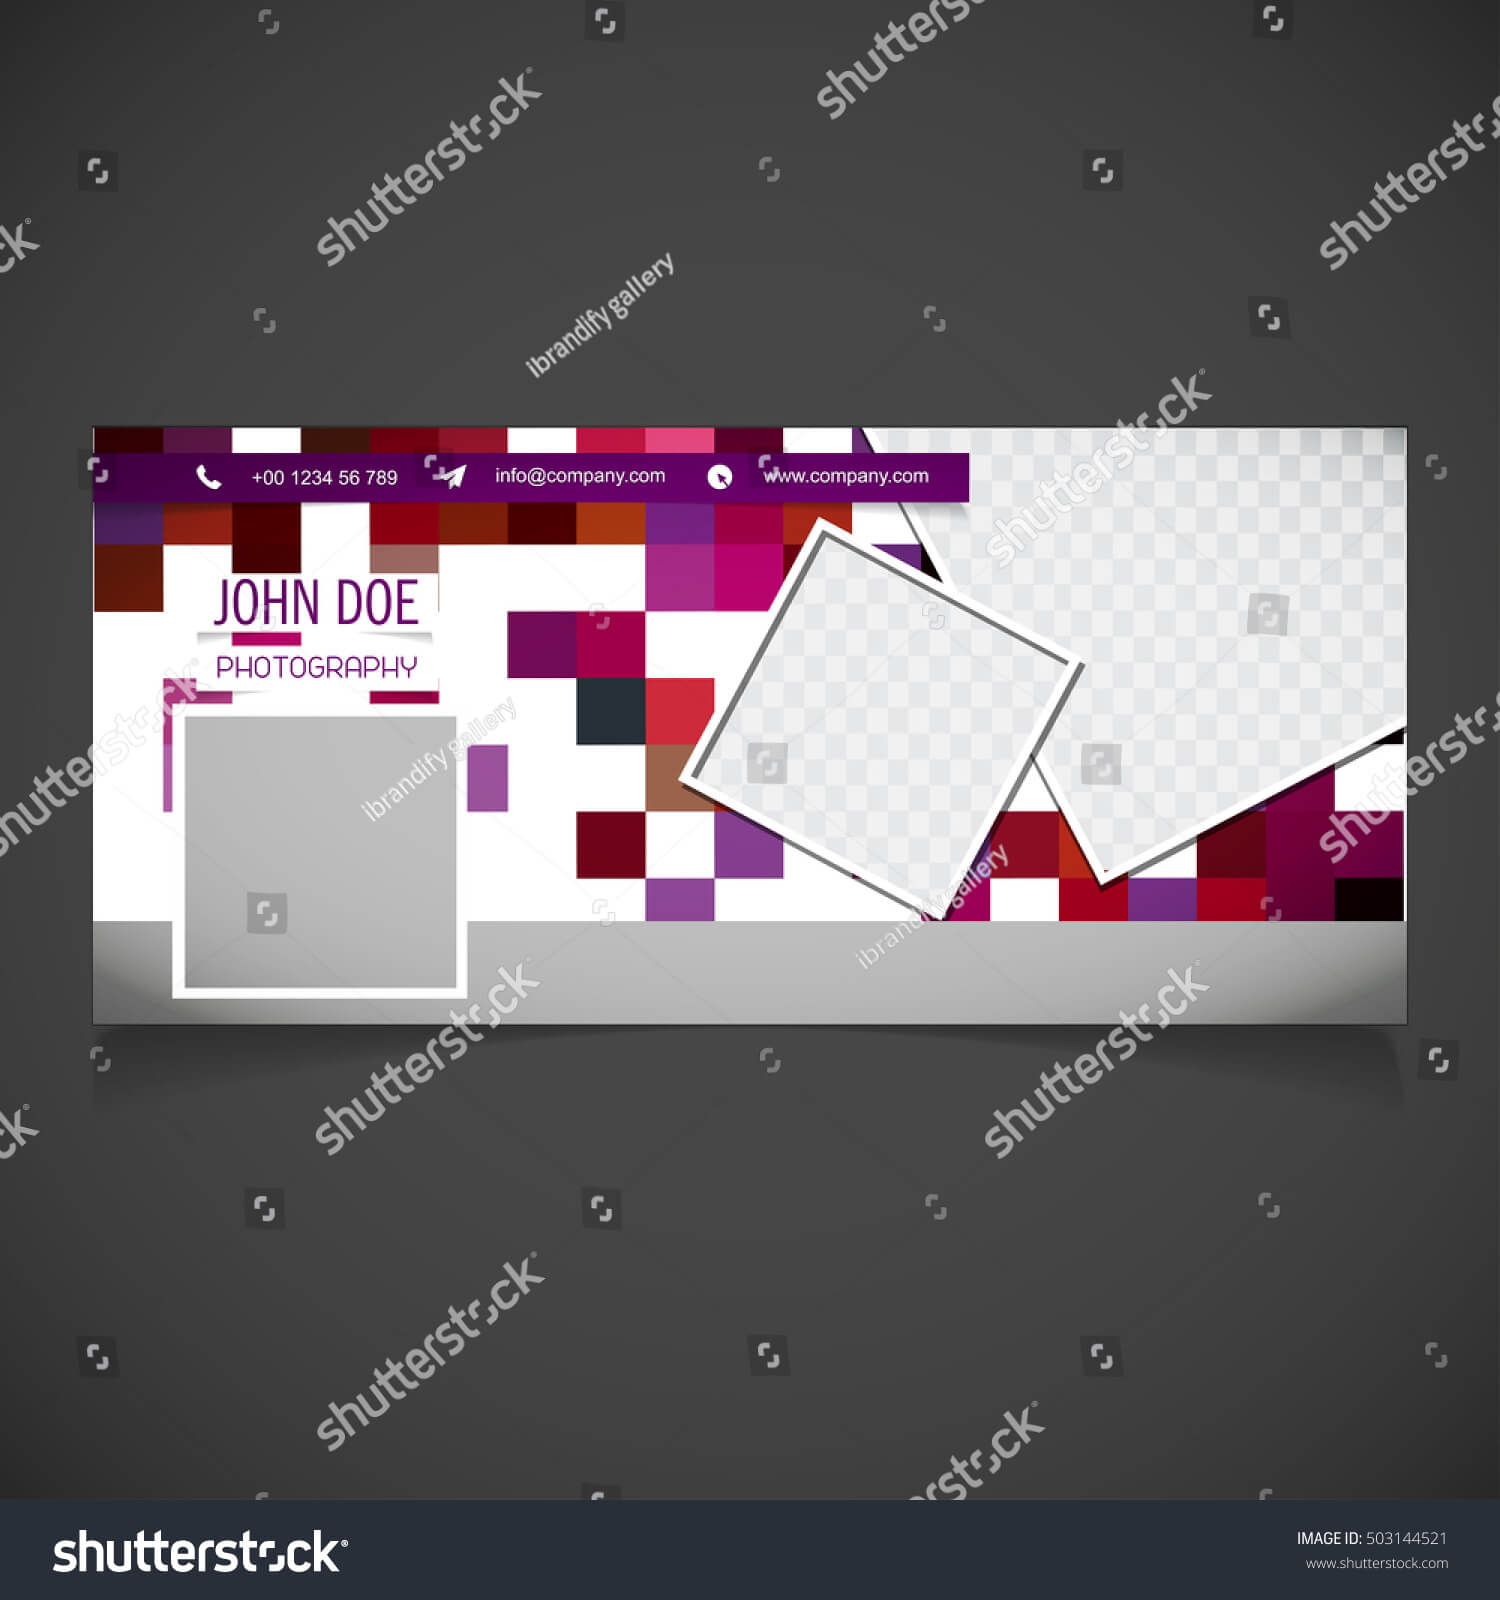 Creative Photography Banner Template Place Image Stock Regarding Photography Banner Template